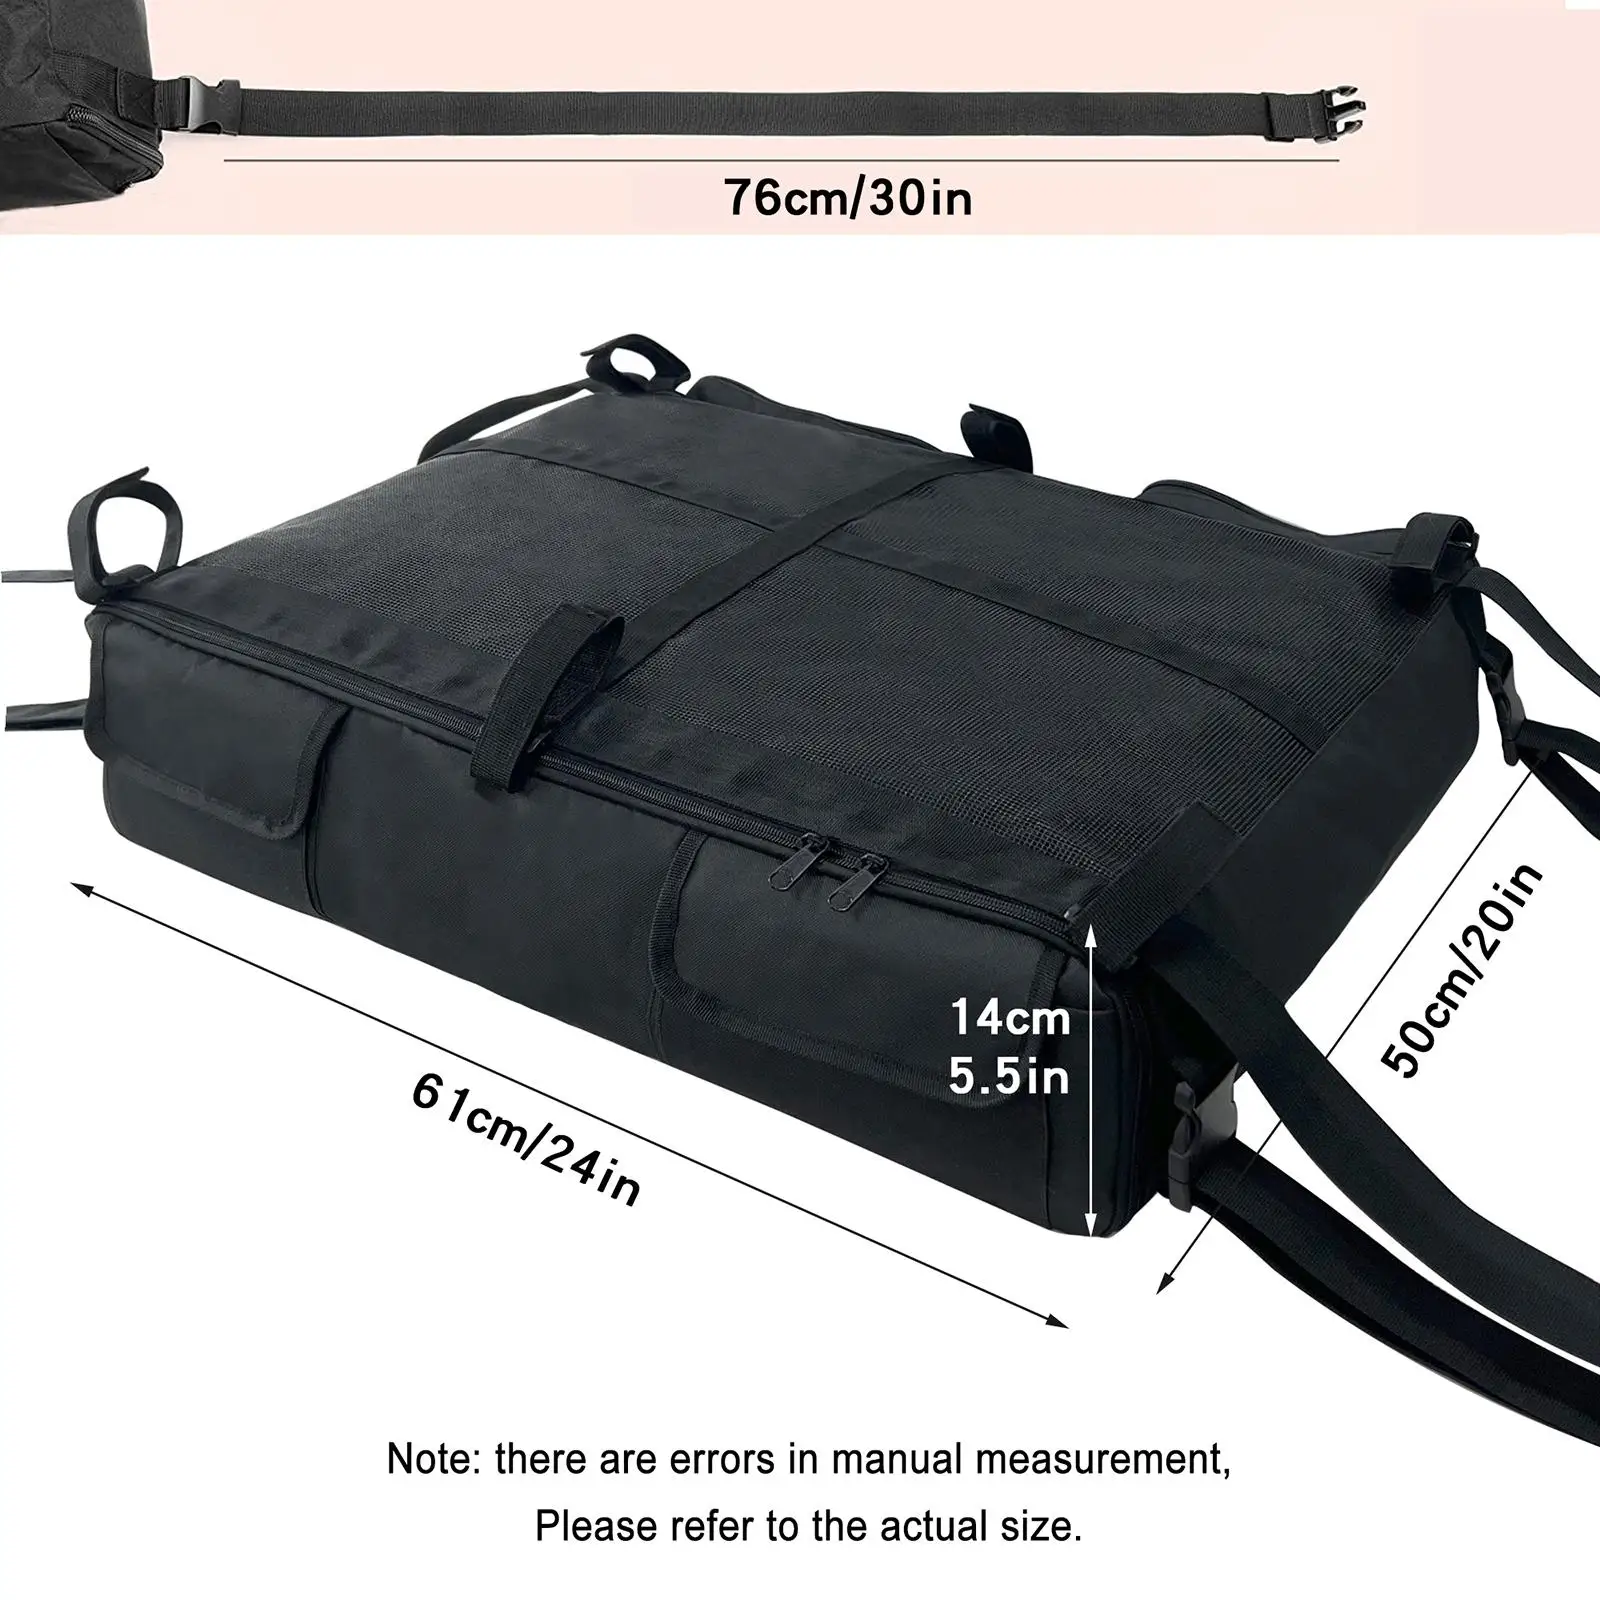 Bimini Top T Top Overhead Storage Bag Pack Holds up to 4 Type II Life Jackets Overhead T Bag Jacket Storage Bag for Boat T Top